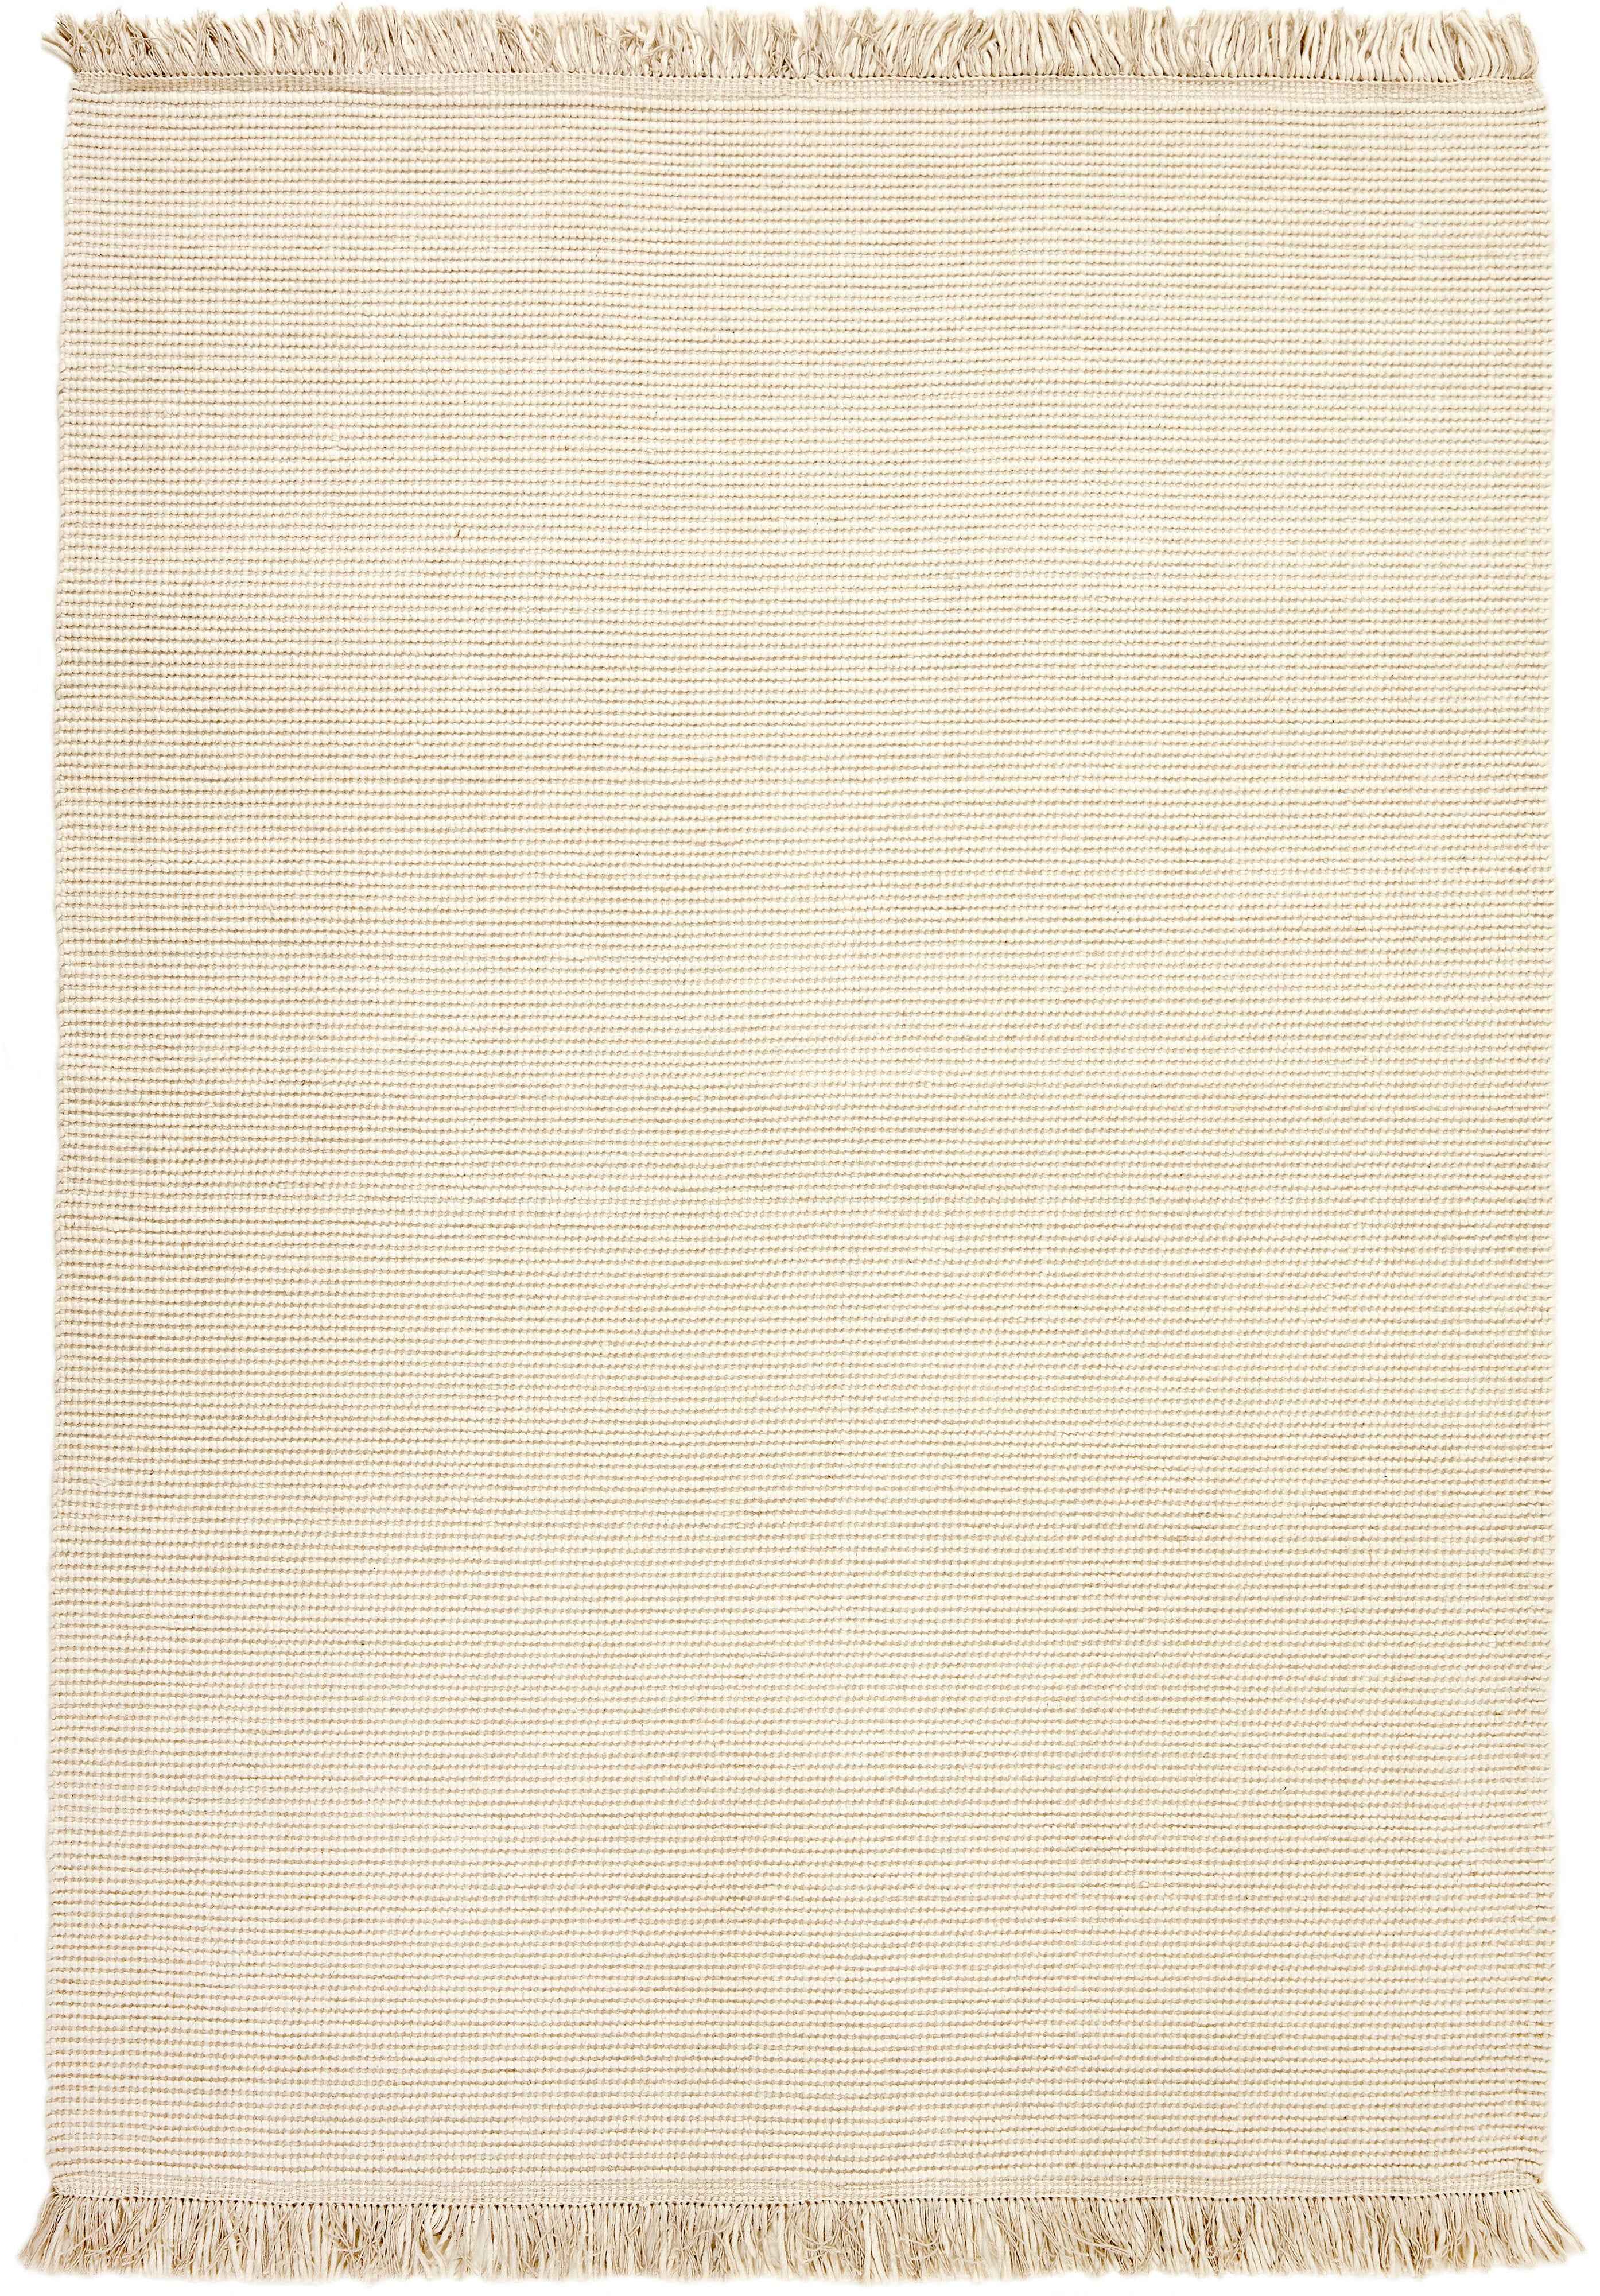 200x200 cm Indian Wool Multicolor Rug-5971A, White - Rugmaster